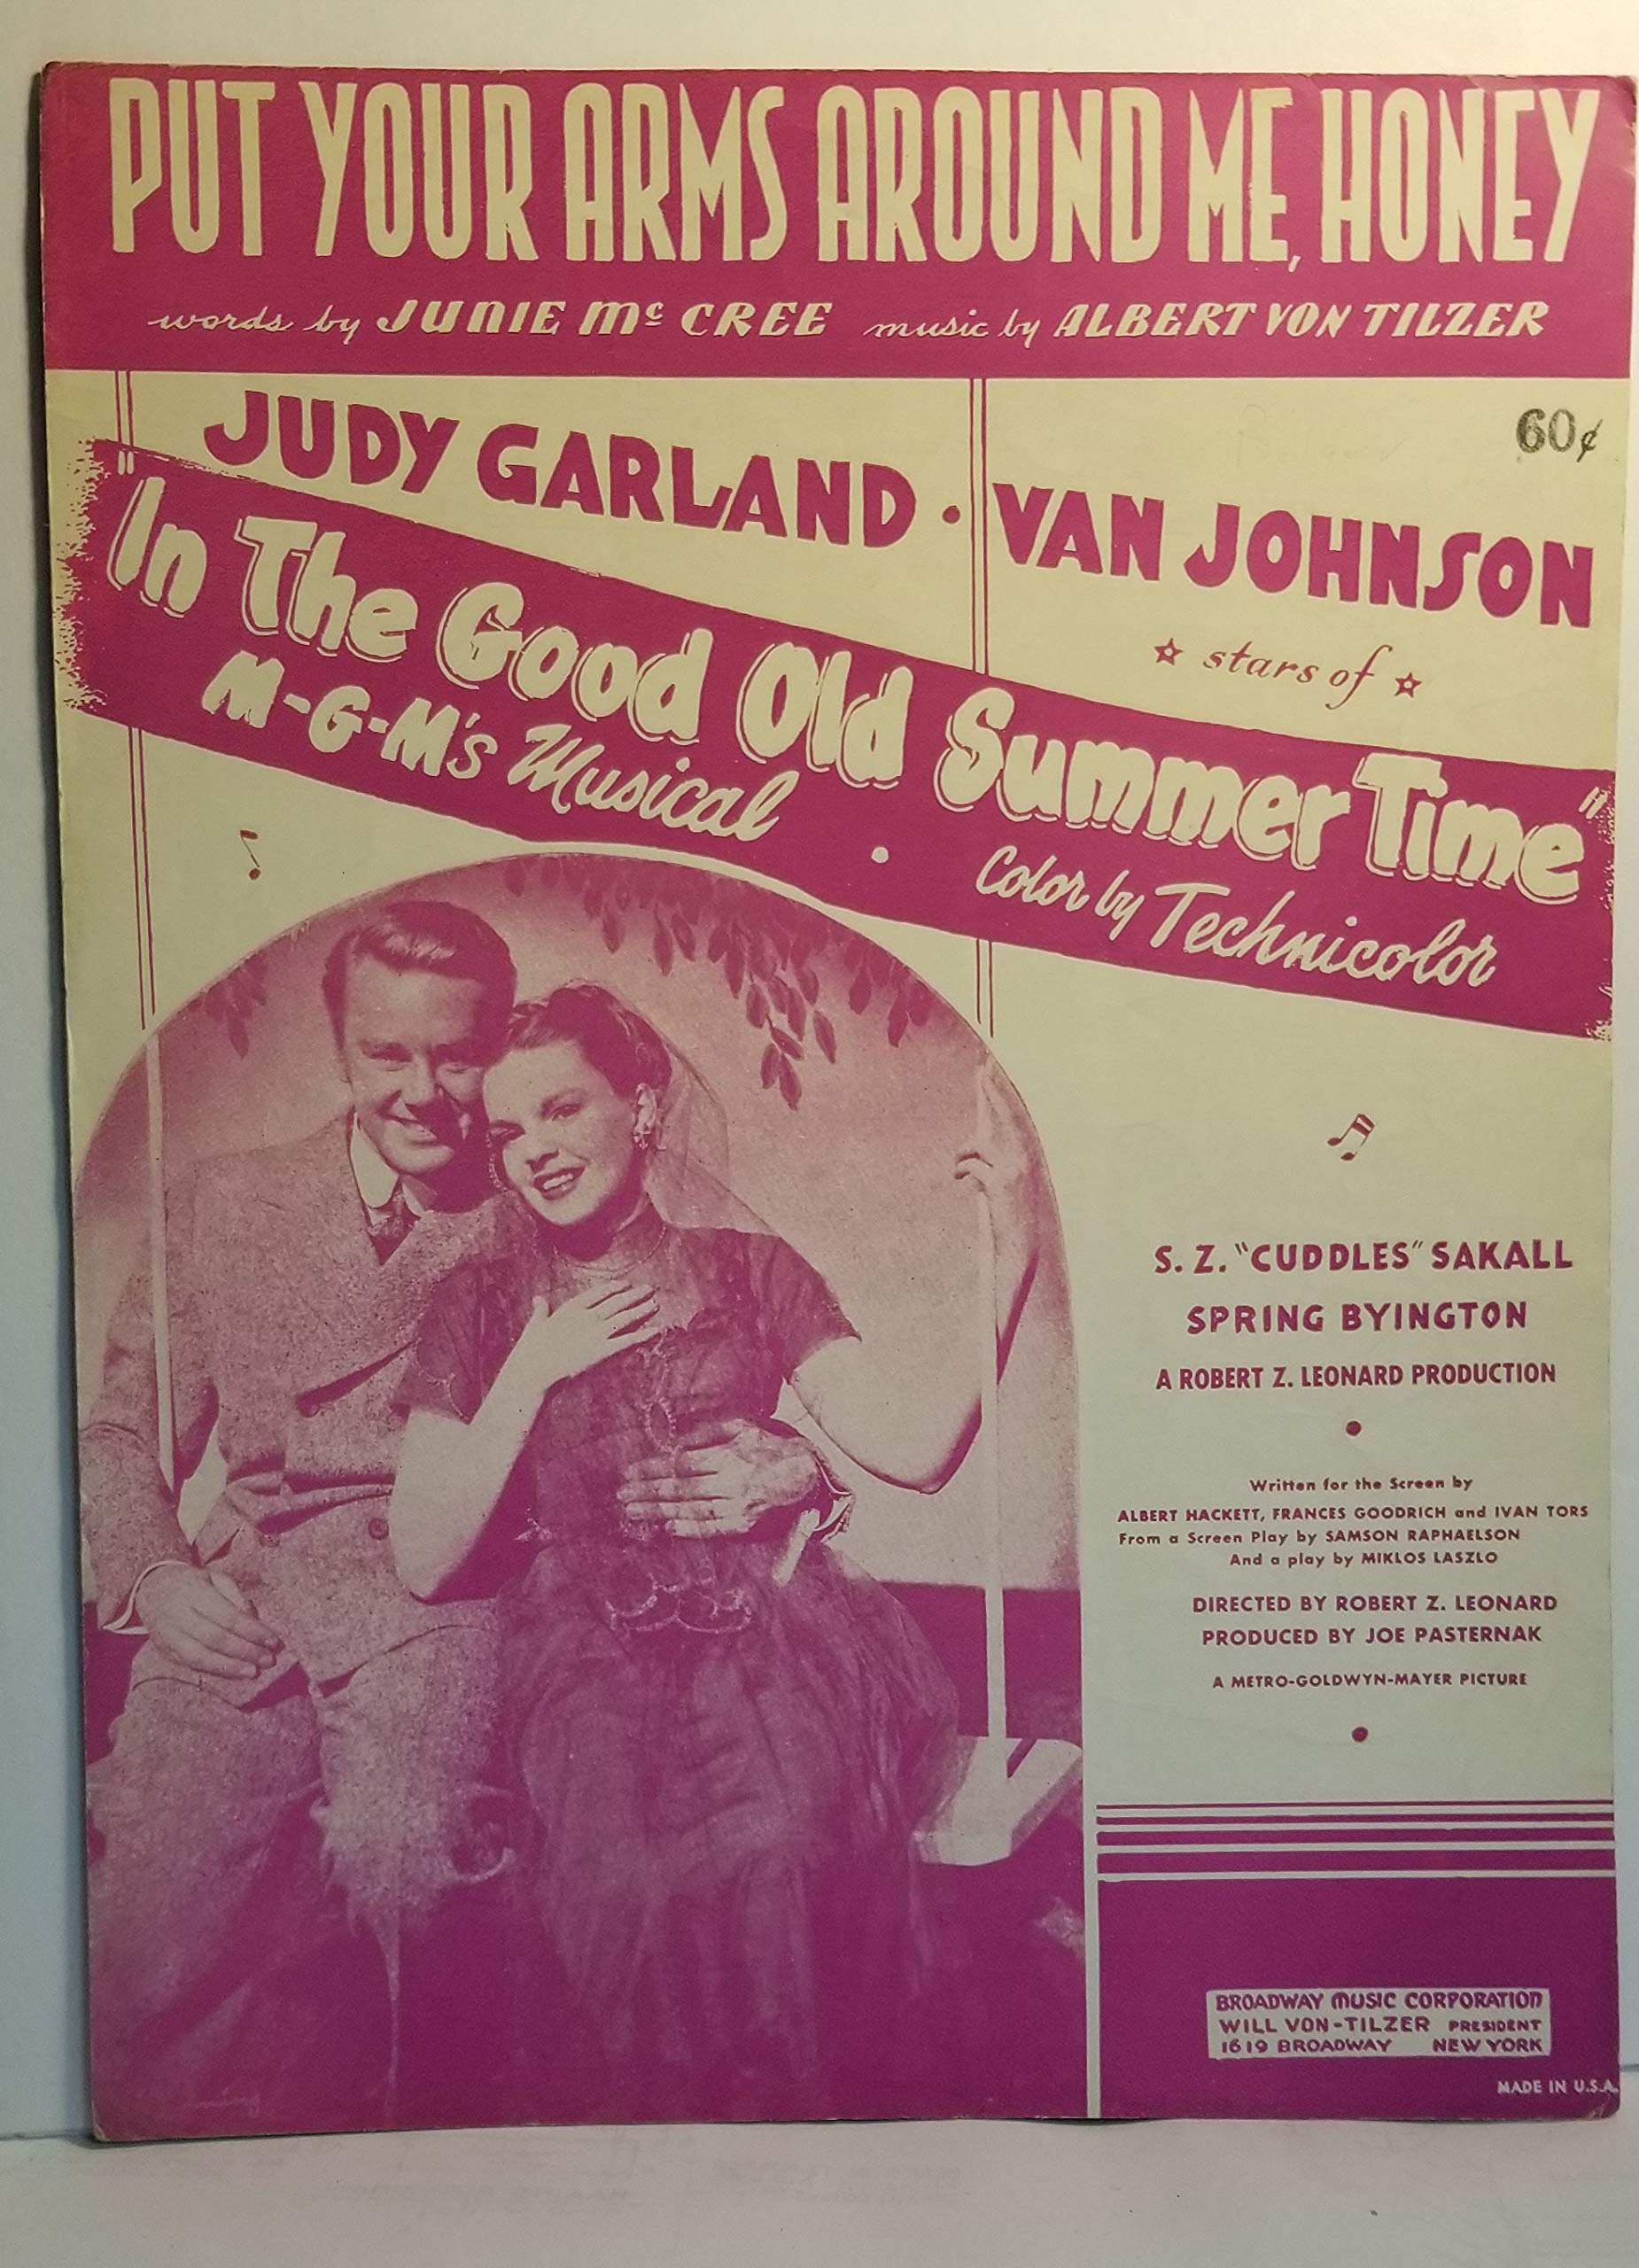 Song lyrics to Put Your Arms Around Me, Honey (I Never Knew Any Girl Like You), Music by Albert von Tilzer, Lyrics by Junie McCree, Sung by Judy Garland in In the Good Old Summertime